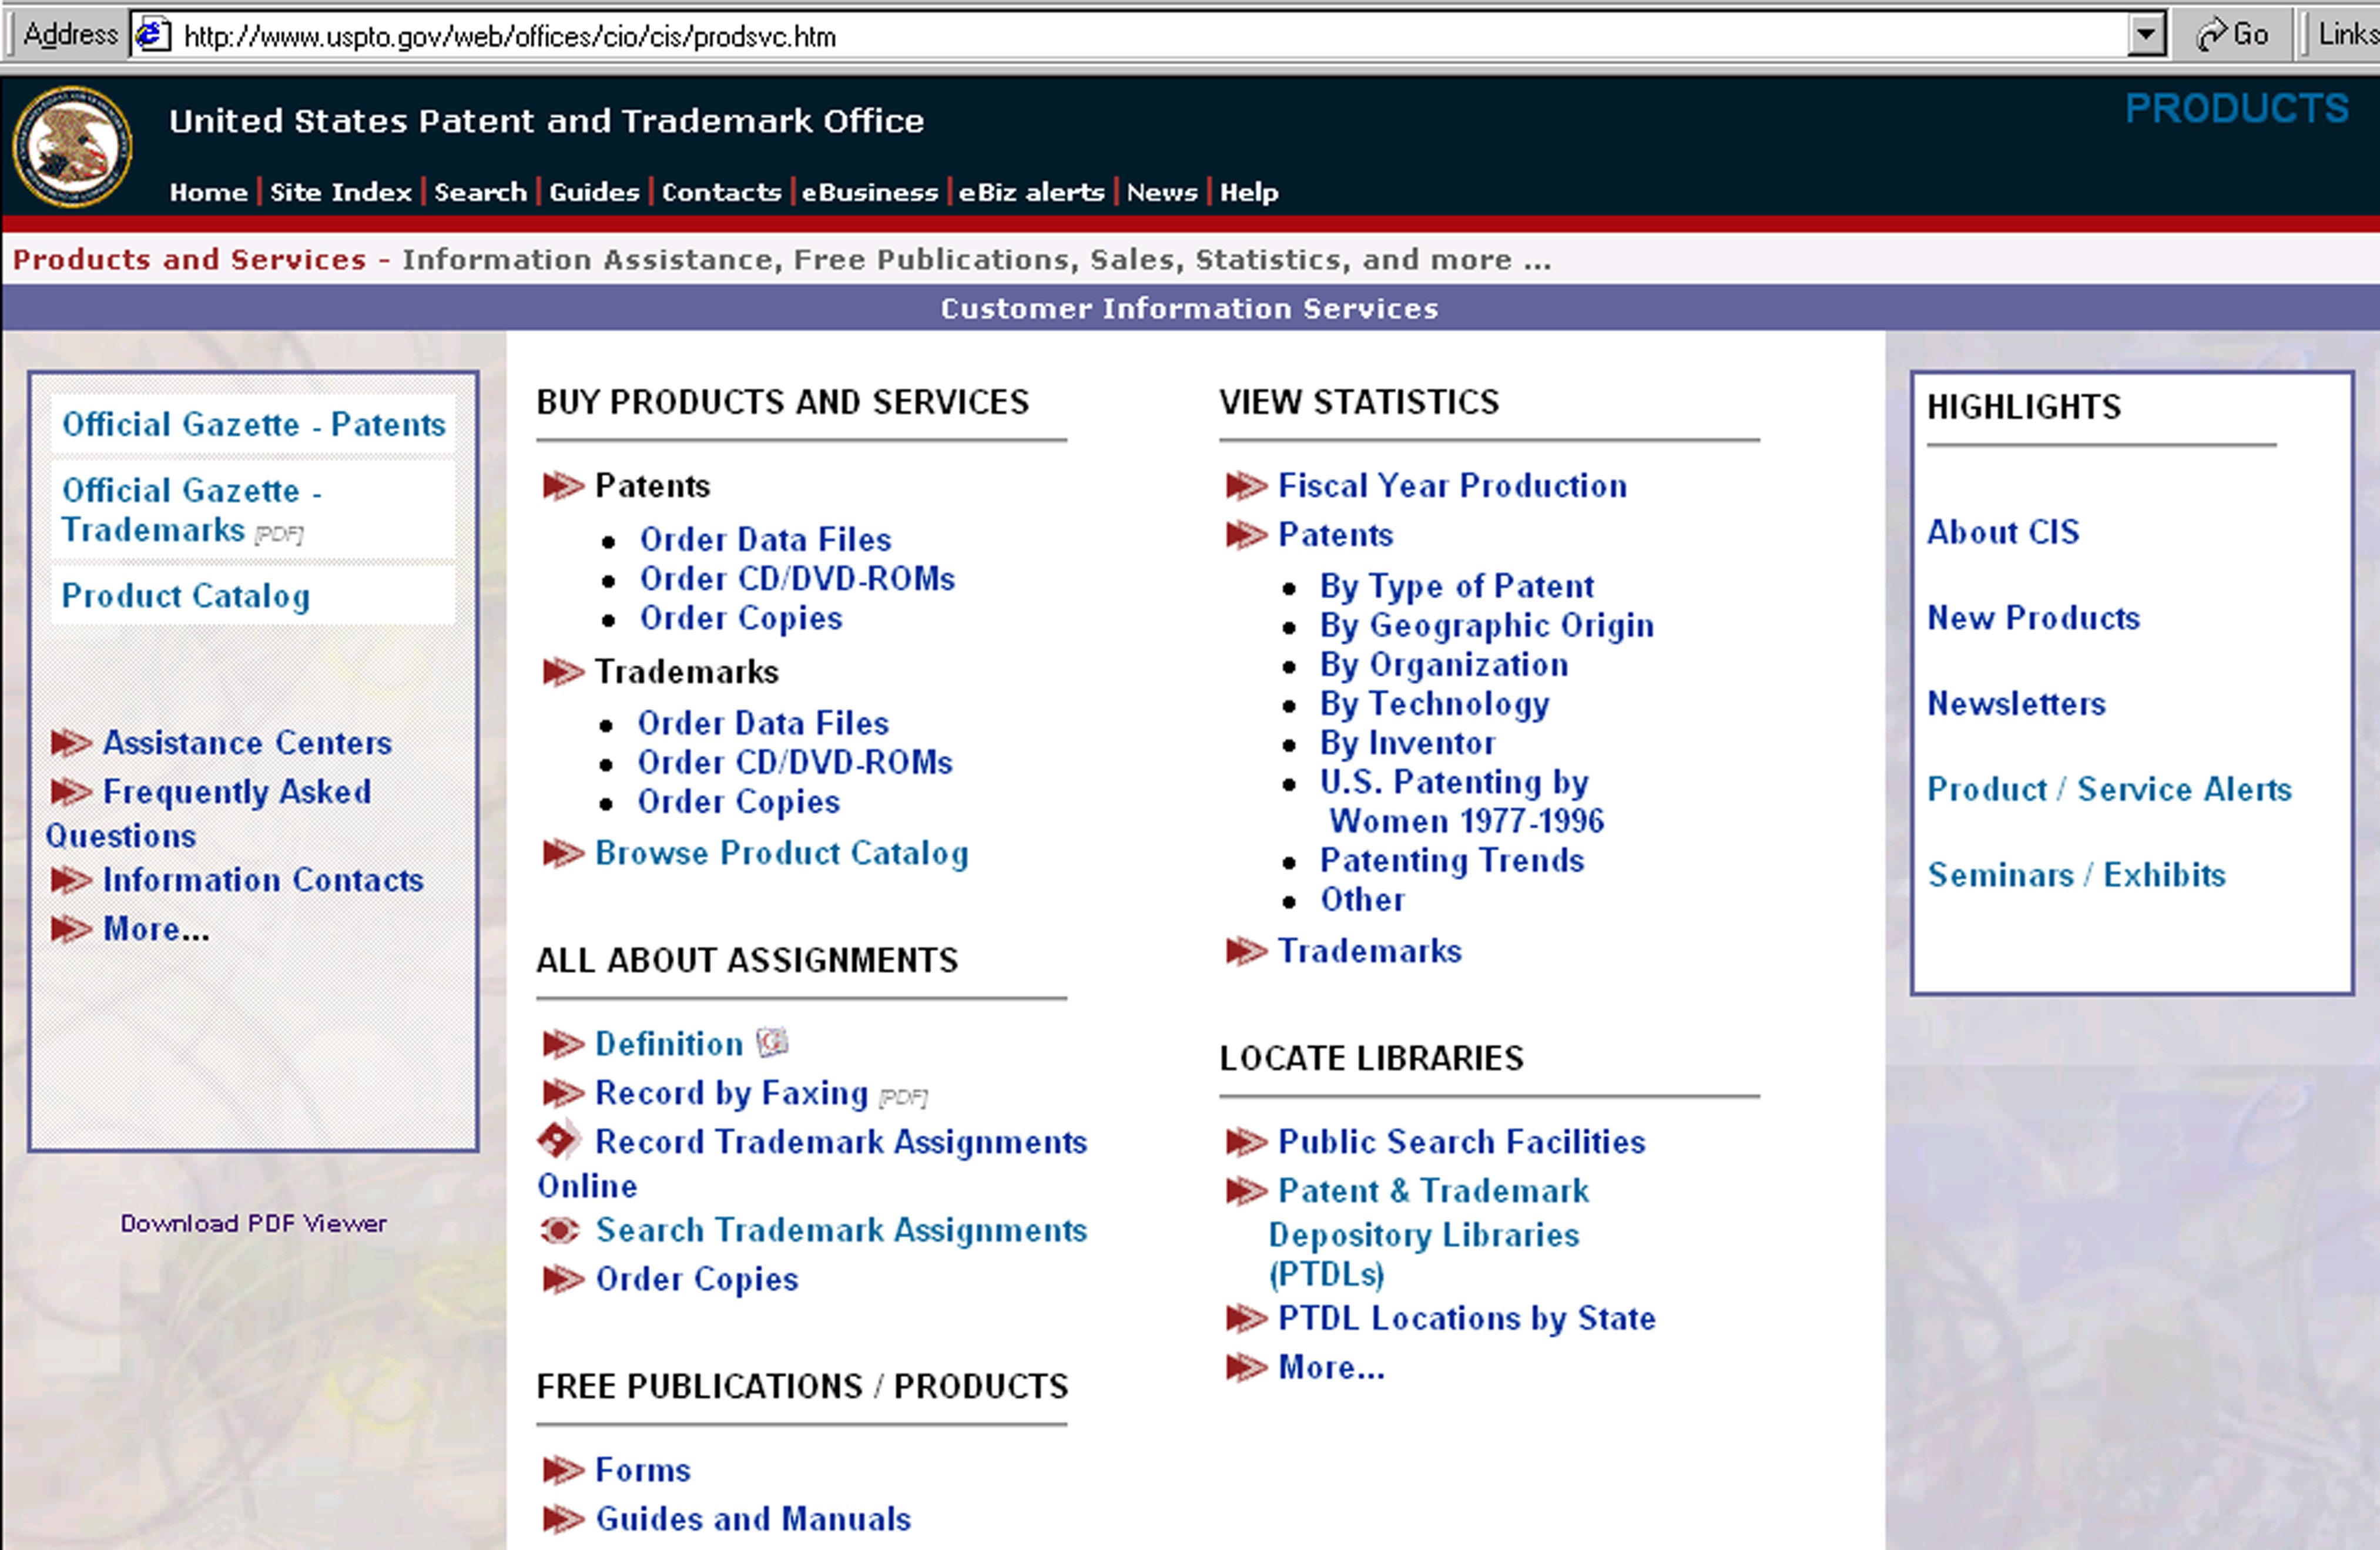 Figure 1 New Products and Services Page